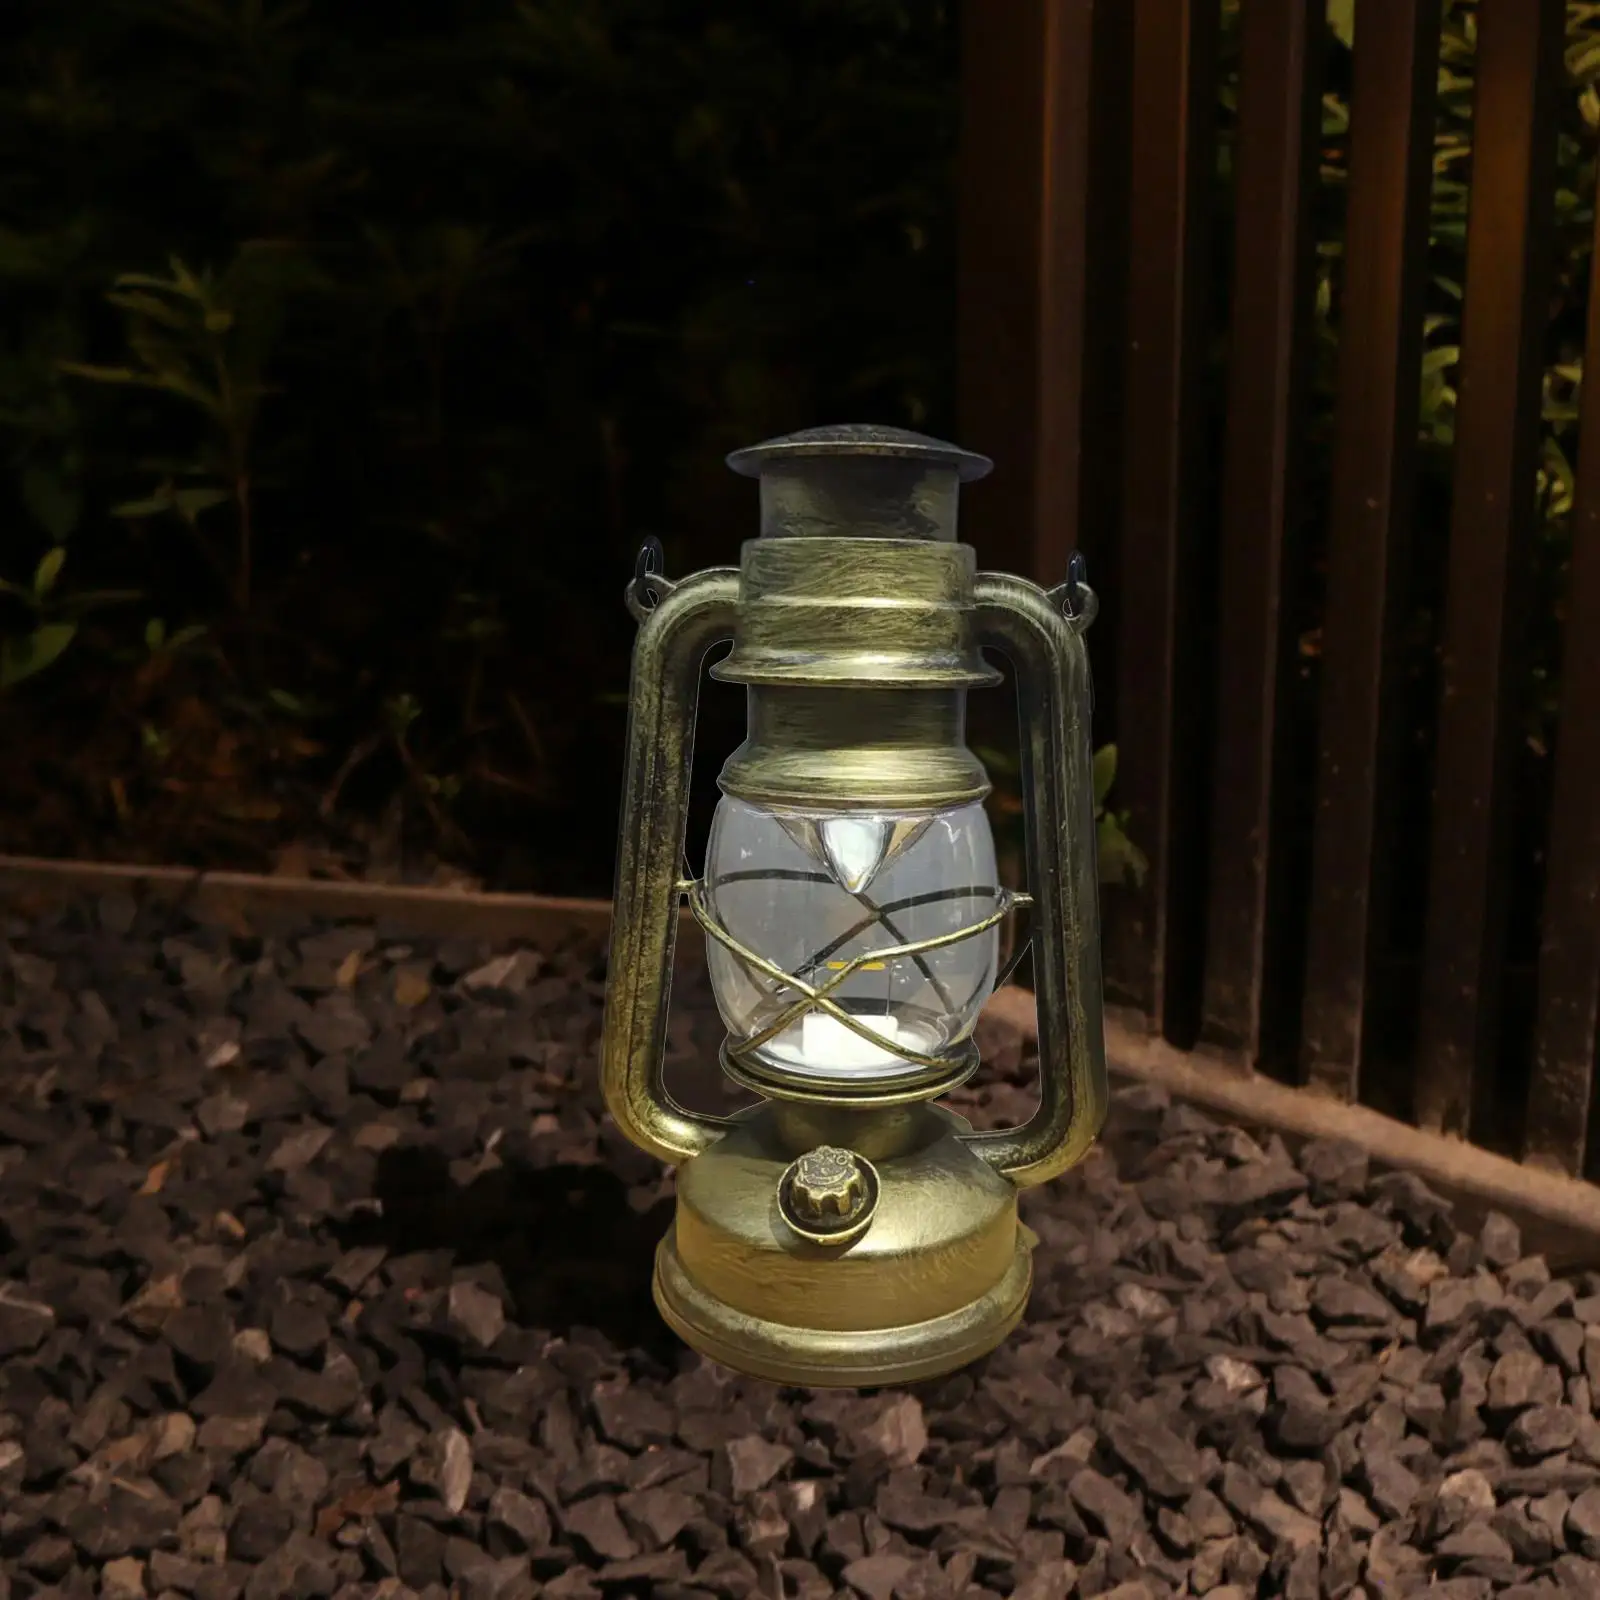 Rustic Oil Lantern Lamp Portable Hanging Lamp Table Lamp for Home Decor